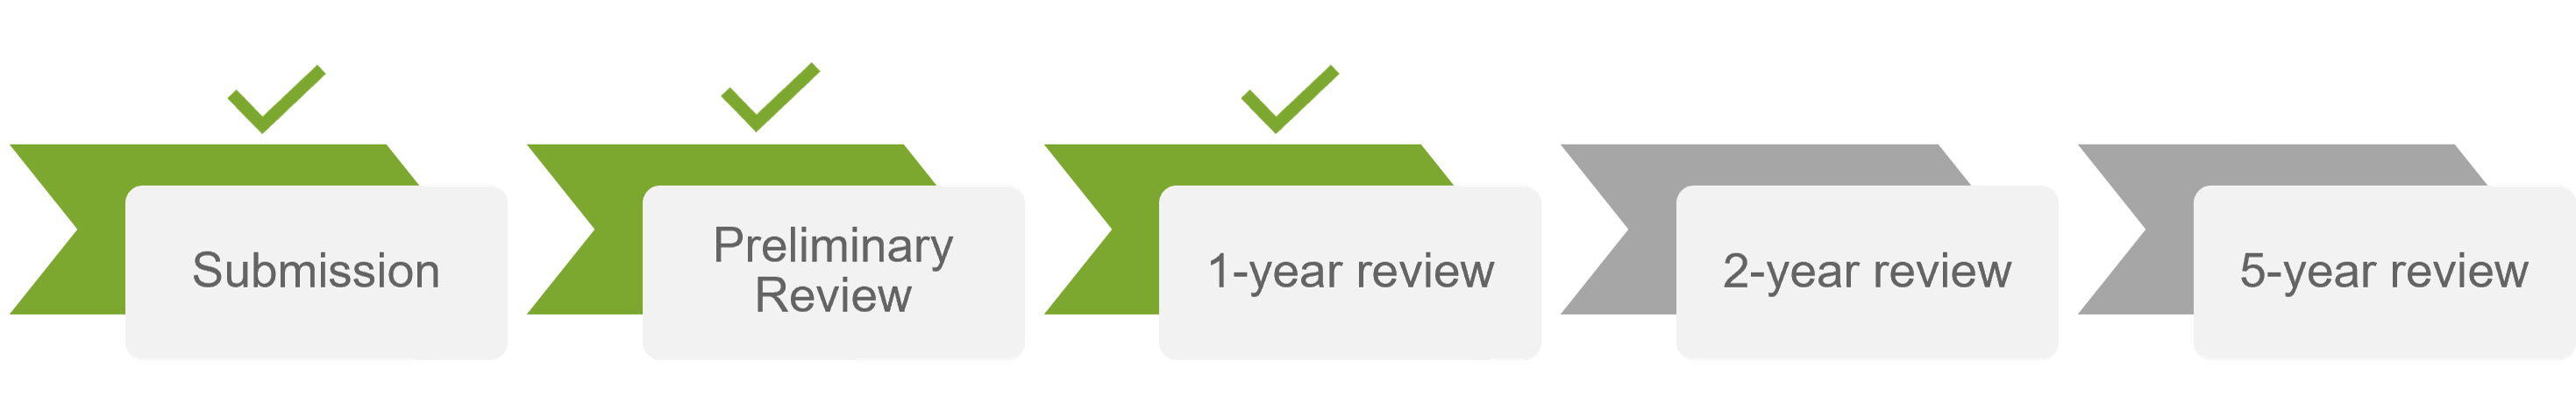 Arrows in a row: submission, preliminary, 1 year review, 2 year review, 5 year review. Indicates completed 1 year review.